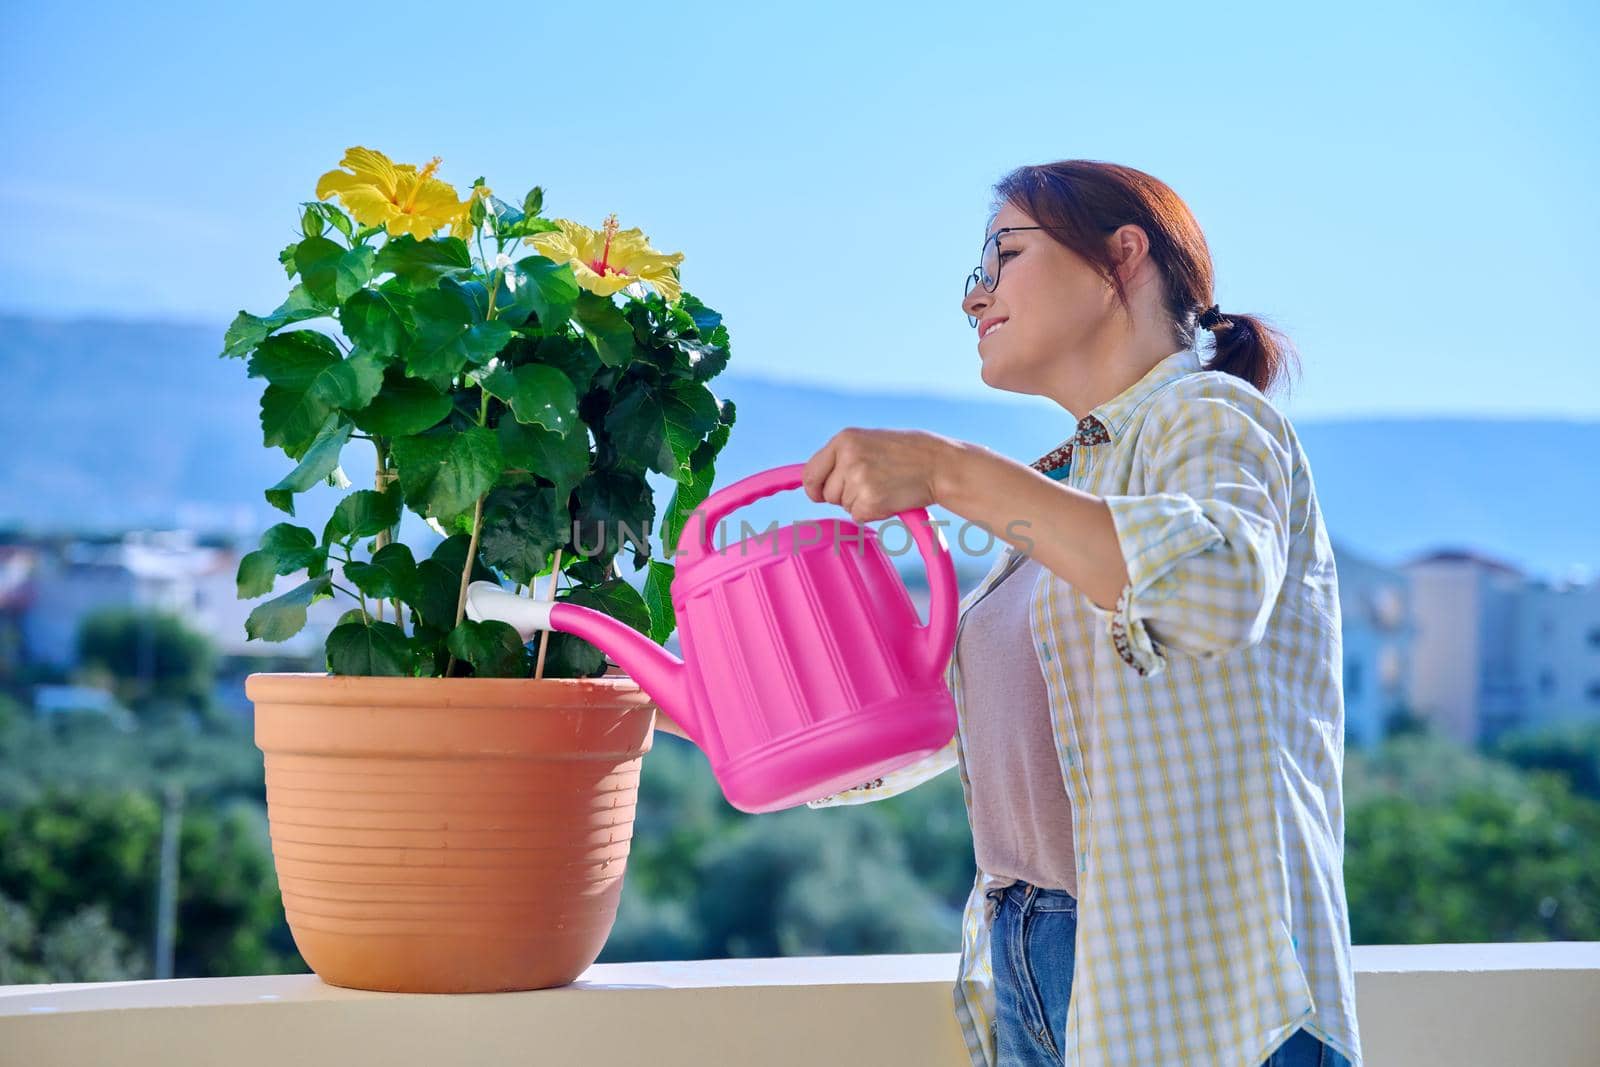 Adult woman watering flower in pot from watering can. Female caring for flowering yellow hibiscus houseplant on outdoor balcony. Green eco trends hobbies and leisure, landscaping balconies and housing